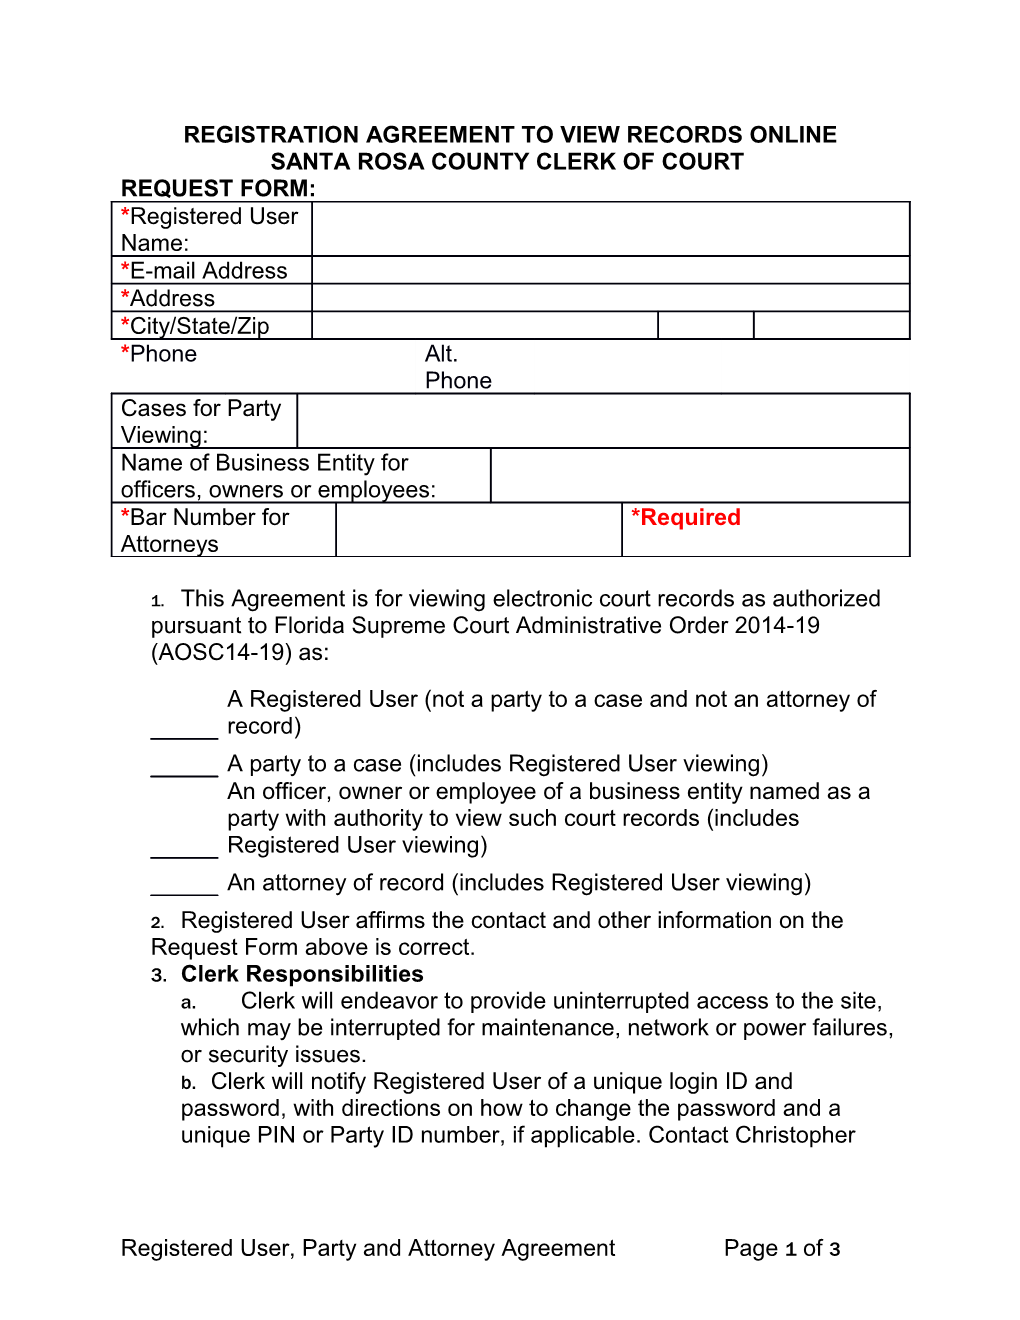 Registration Agreement to View Records Online